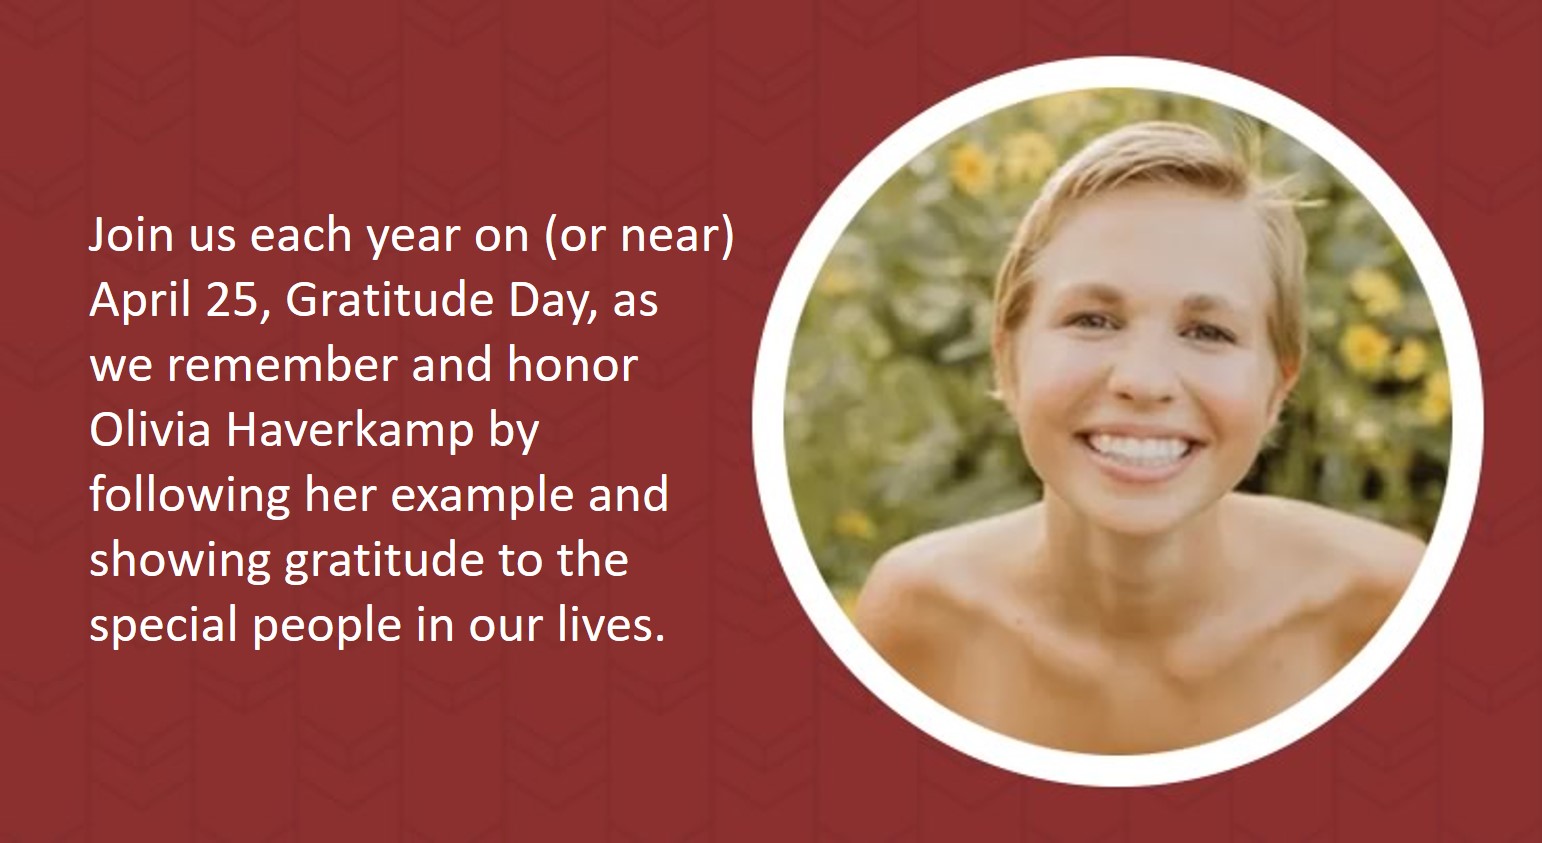 Join us each year on (or near) April 25, Gratitude Day, as we remember and honor Olivia Haverkamp by following her example and showing gratitude to the special people in our lives.